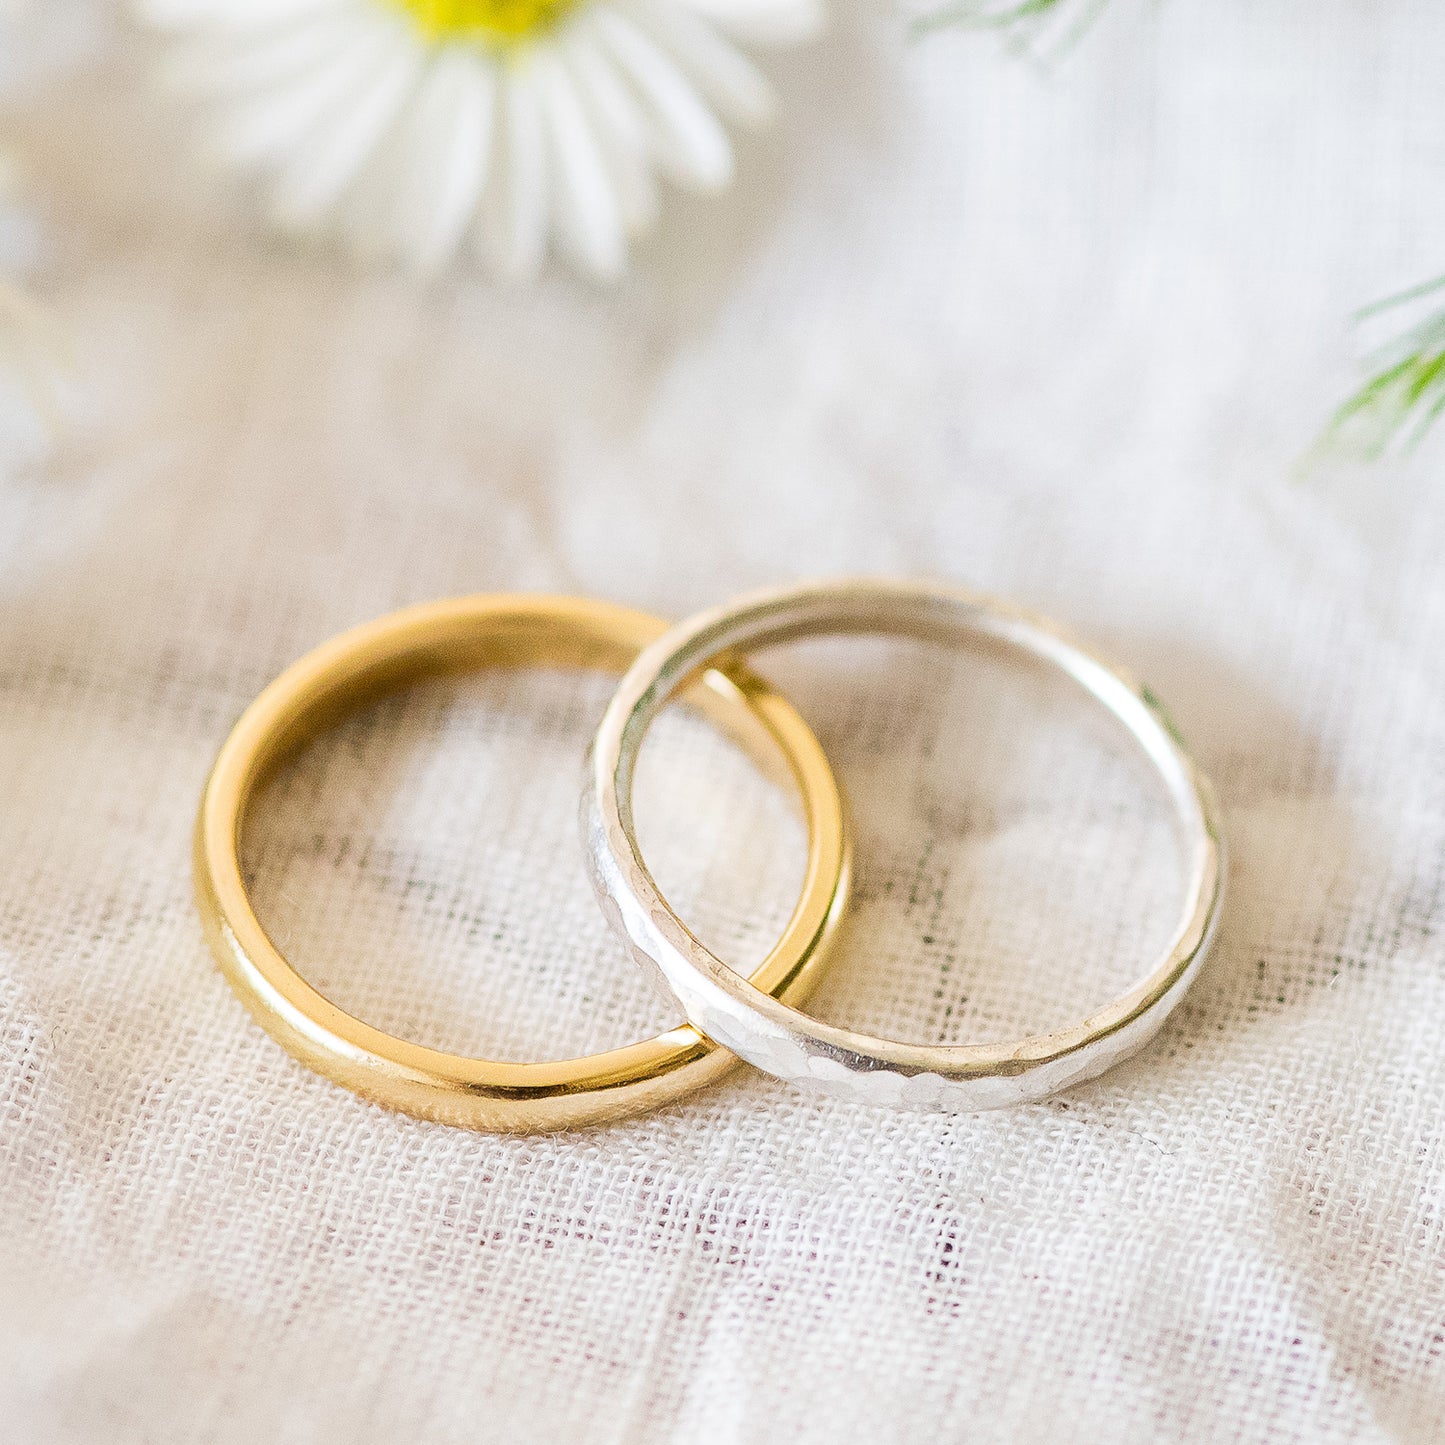 A pair of 2.3mm D shaped band, one 18ct yellow gold, one sterling silver hammered, close up on fabric background